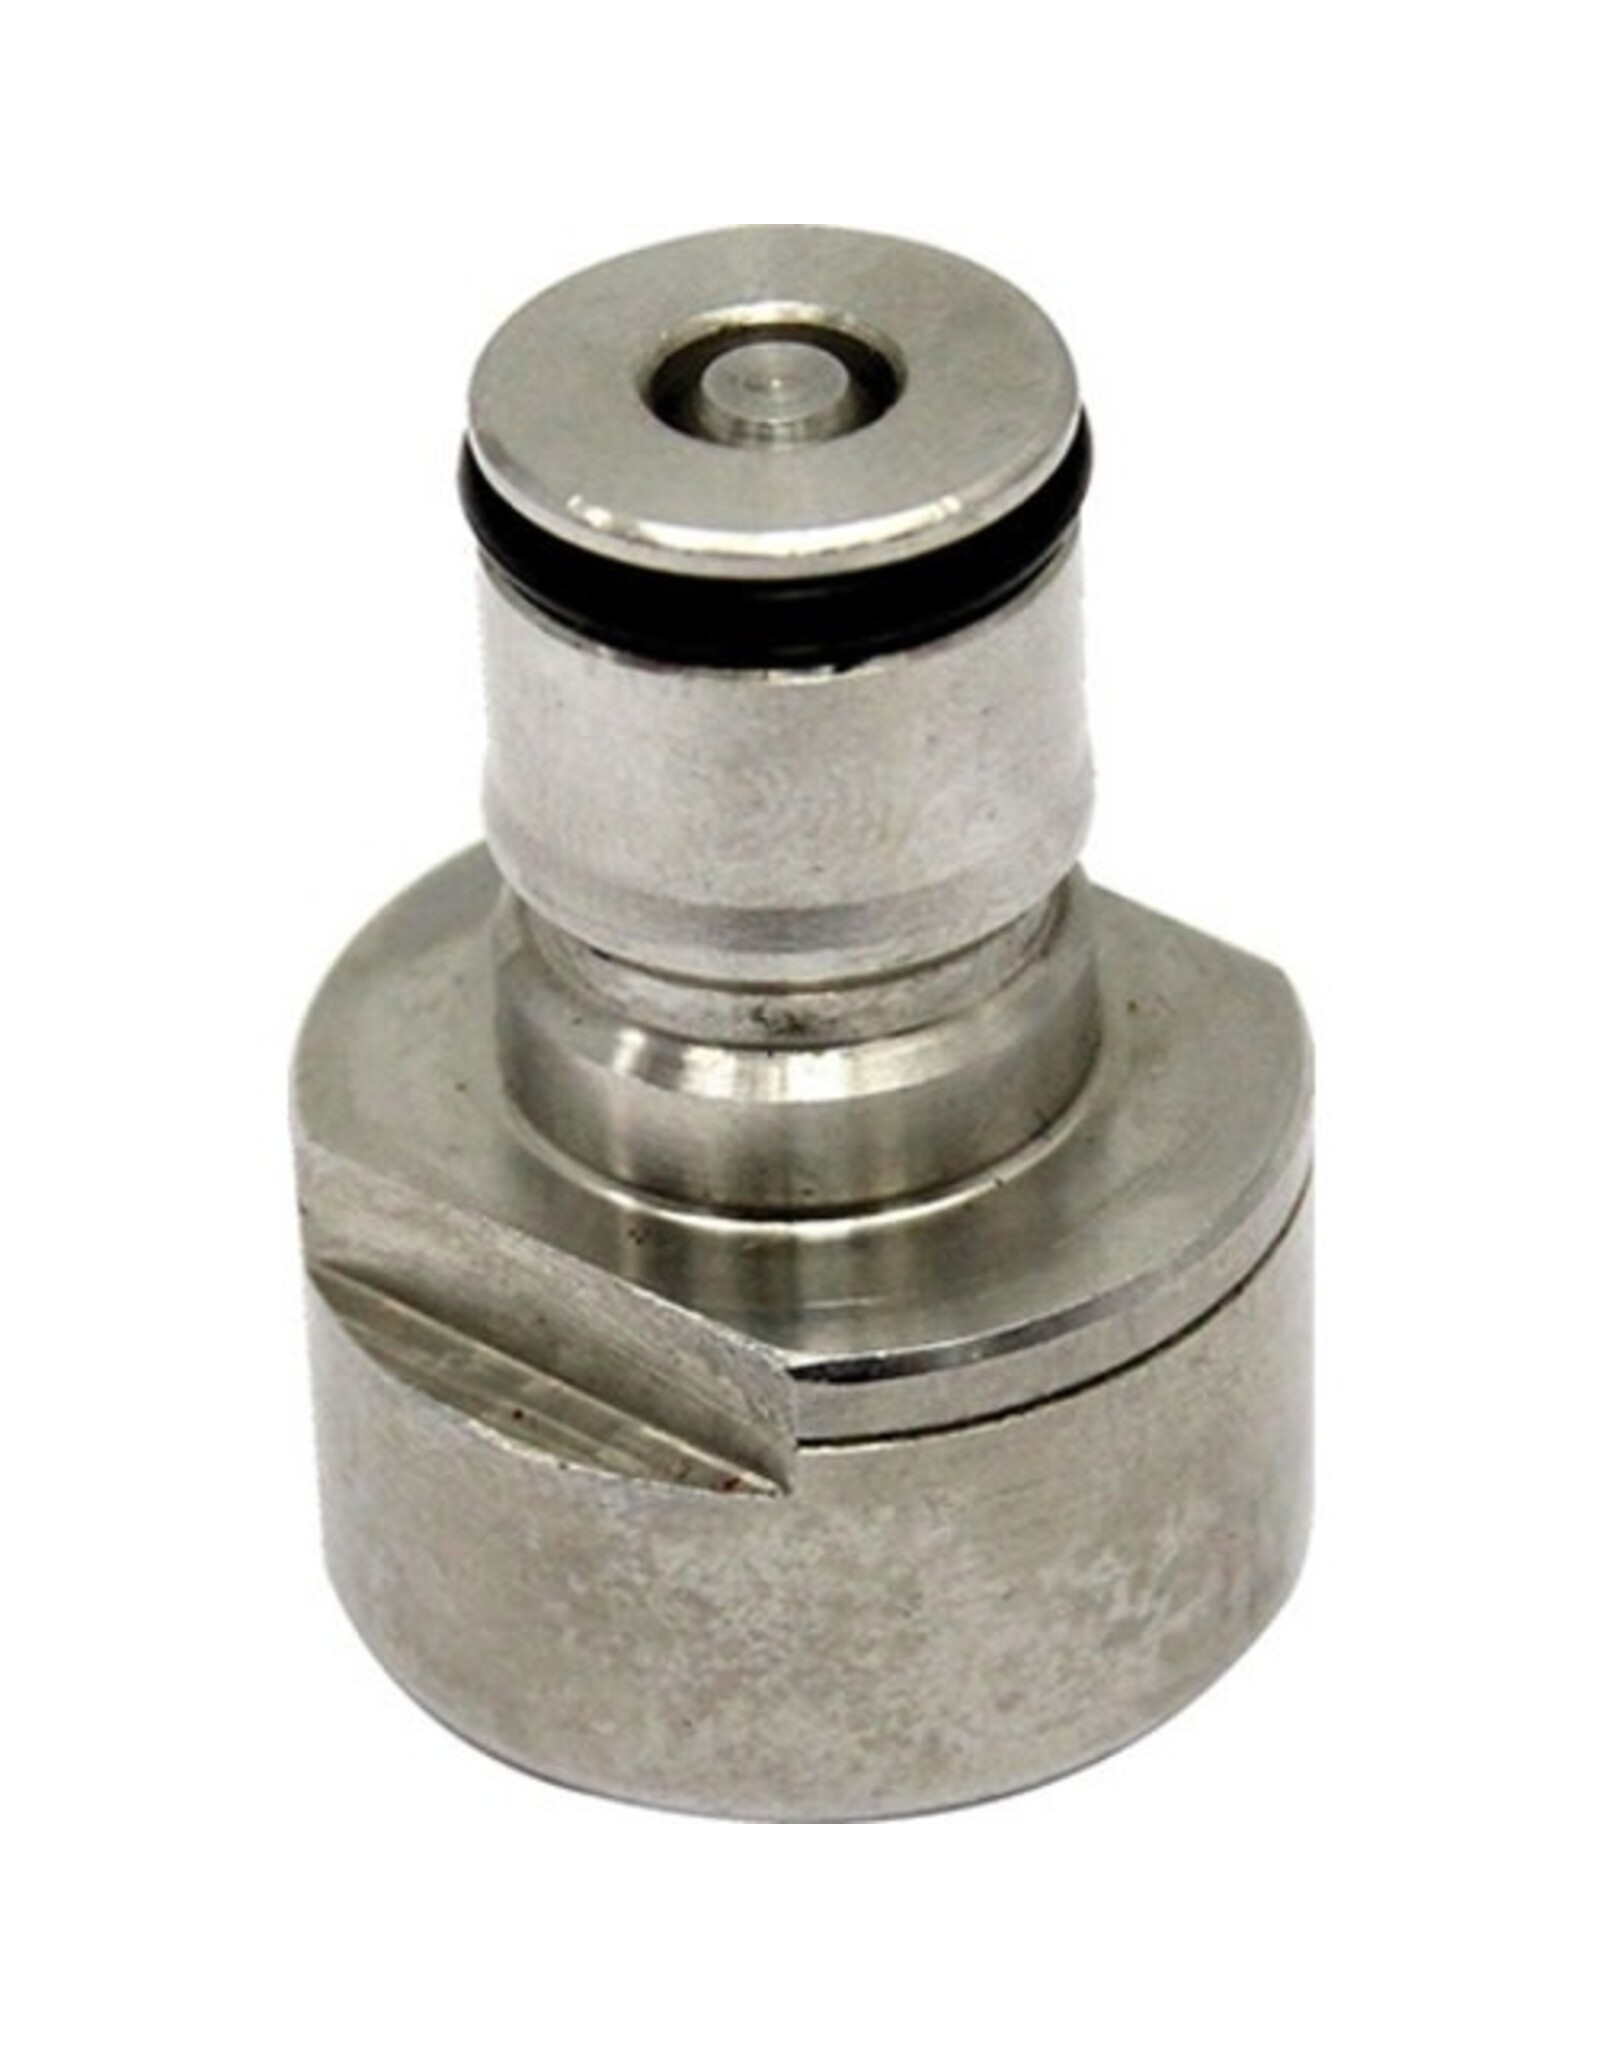 Coupler Sanke to Ball Lock Adapters: Gas